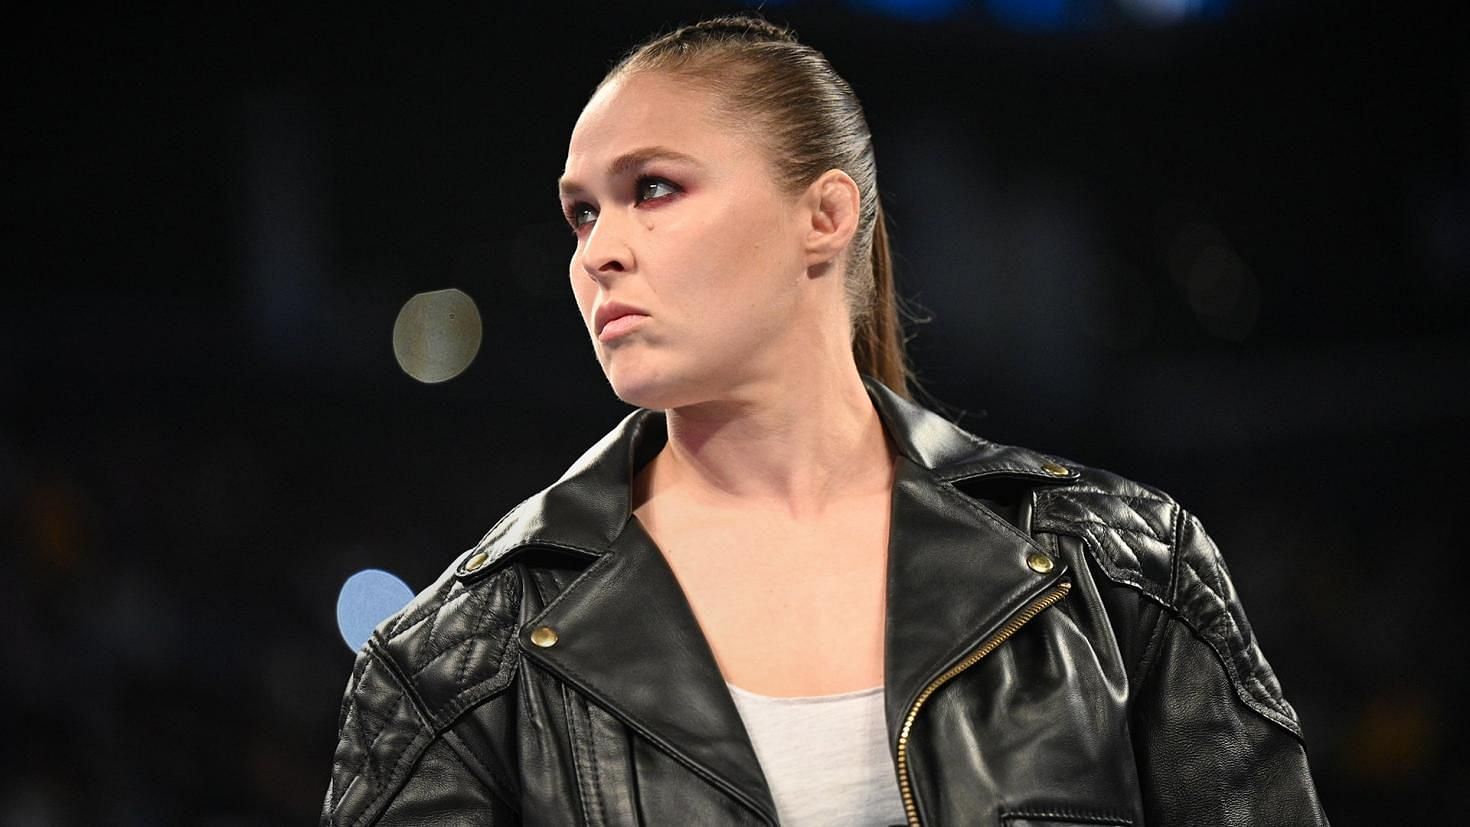 Ronda Rousey was on SmackDown this week.